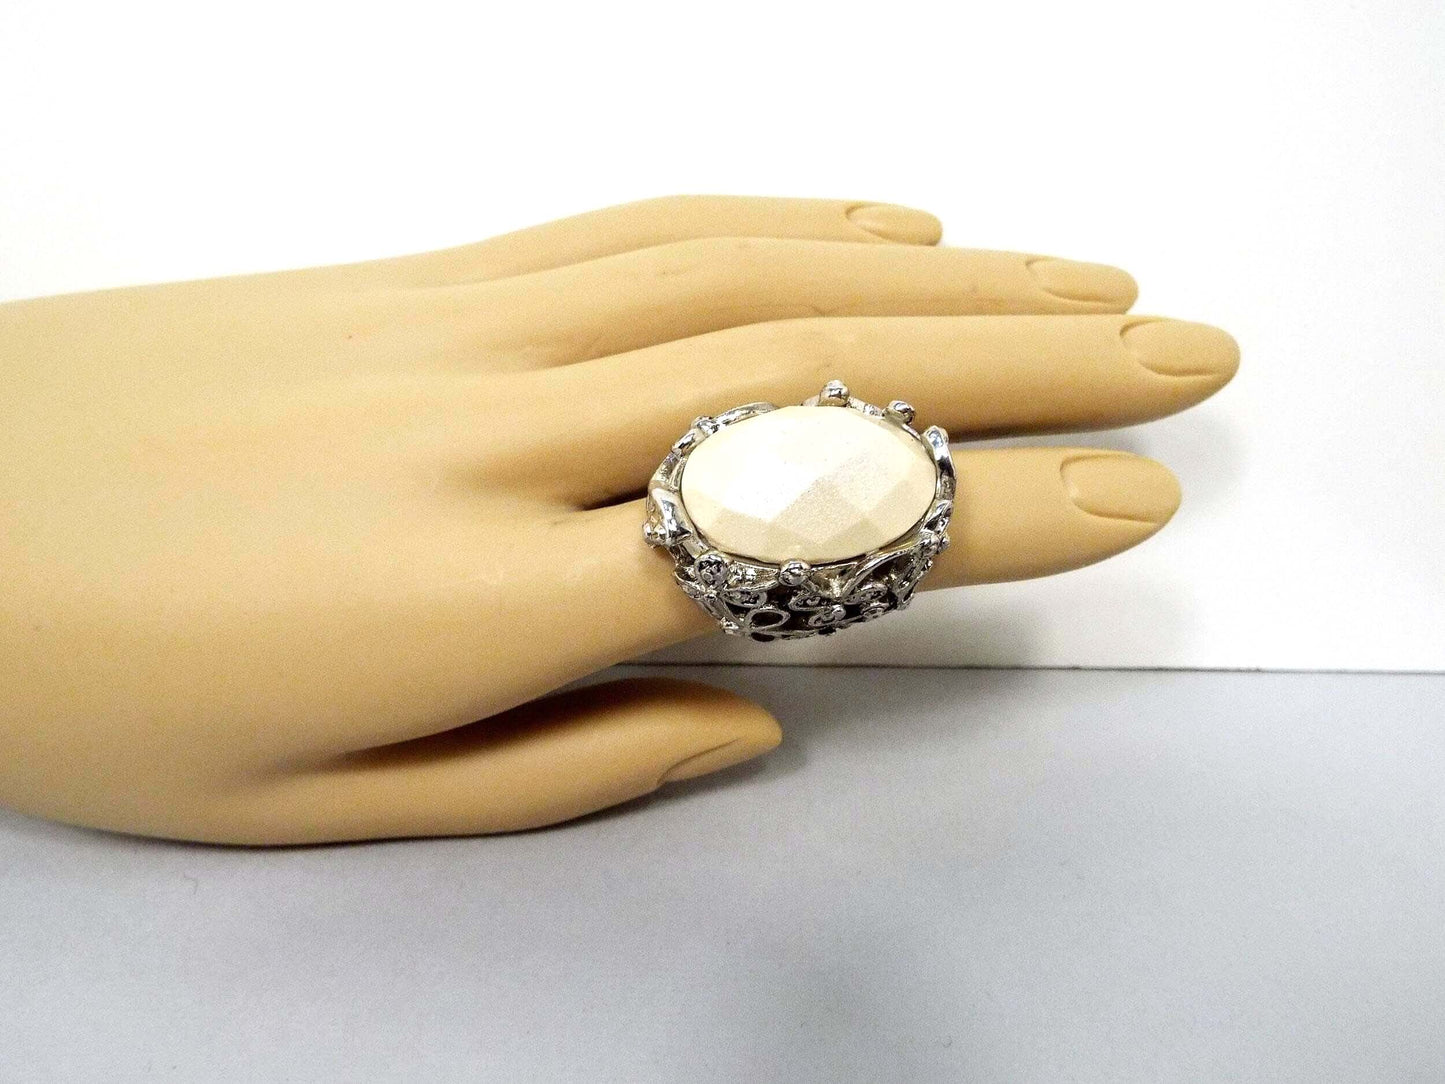 Large Vintage Off White Pearly Lucite Filigree Ring